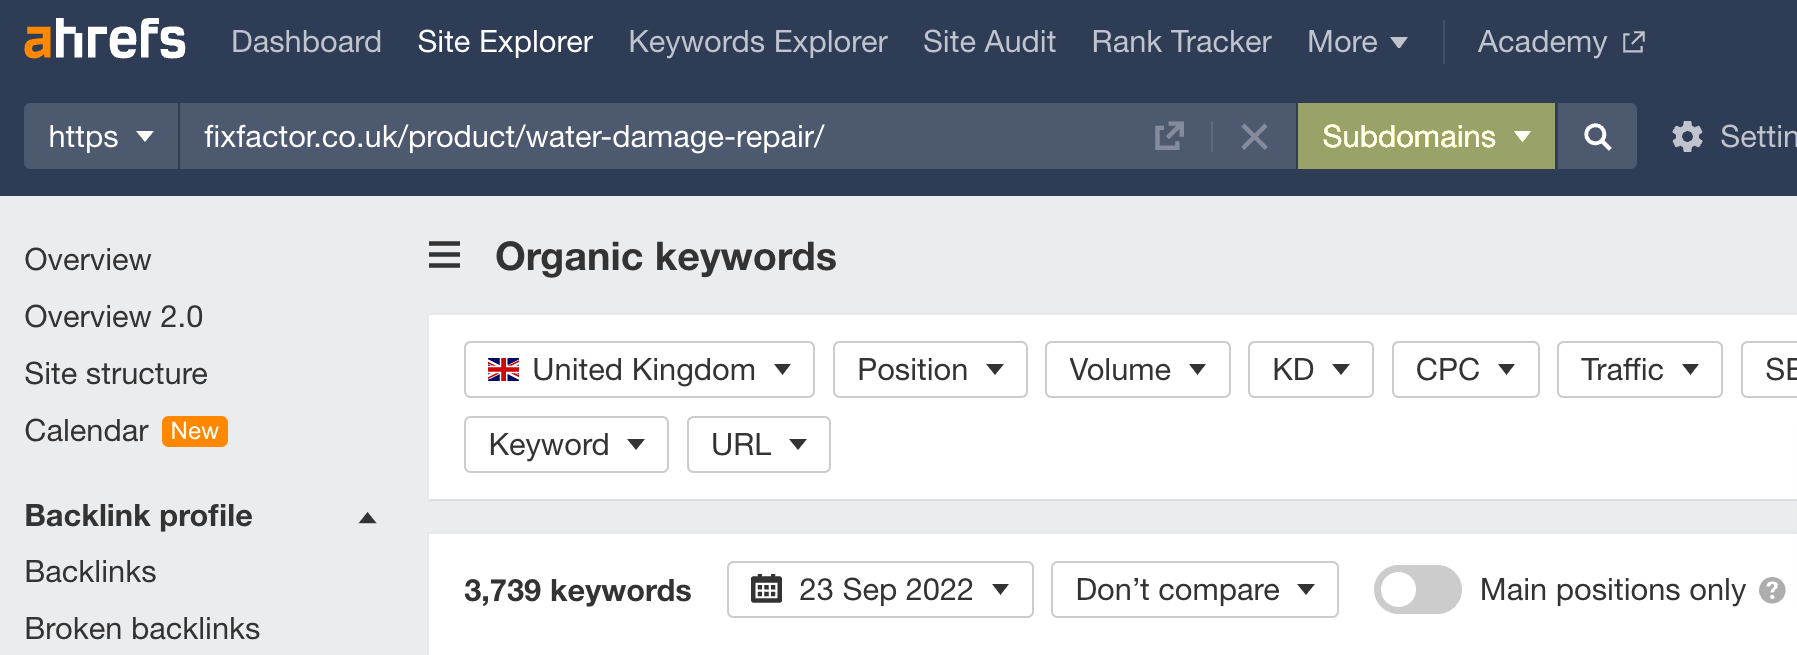 Organic keywords report with "subdomains" mode